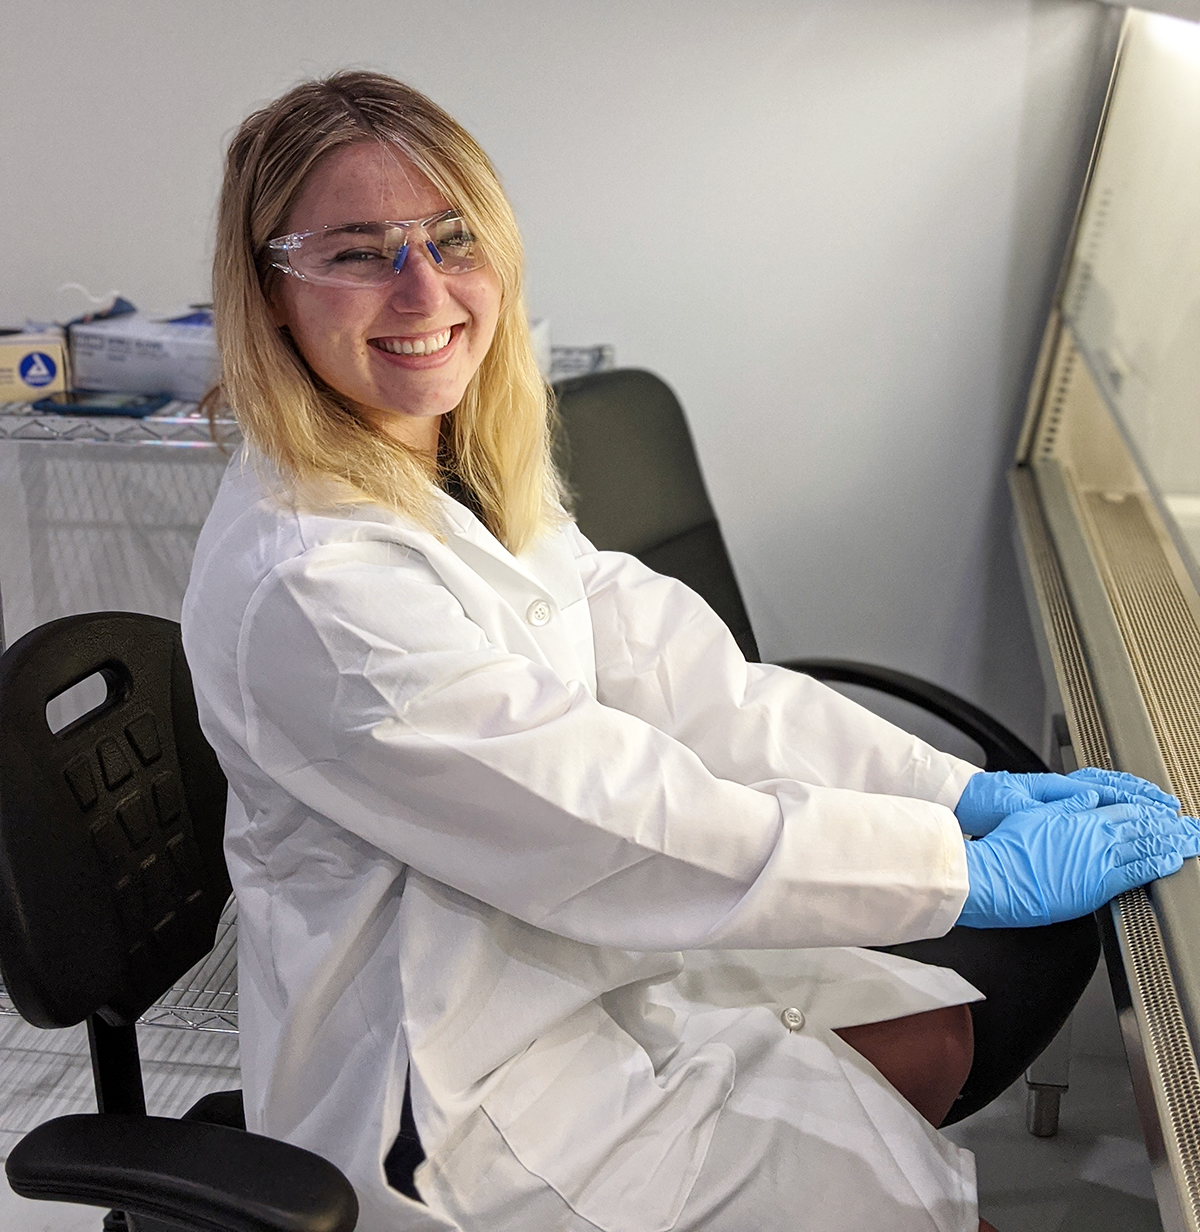 Student in a labcoat and lab setting smiling